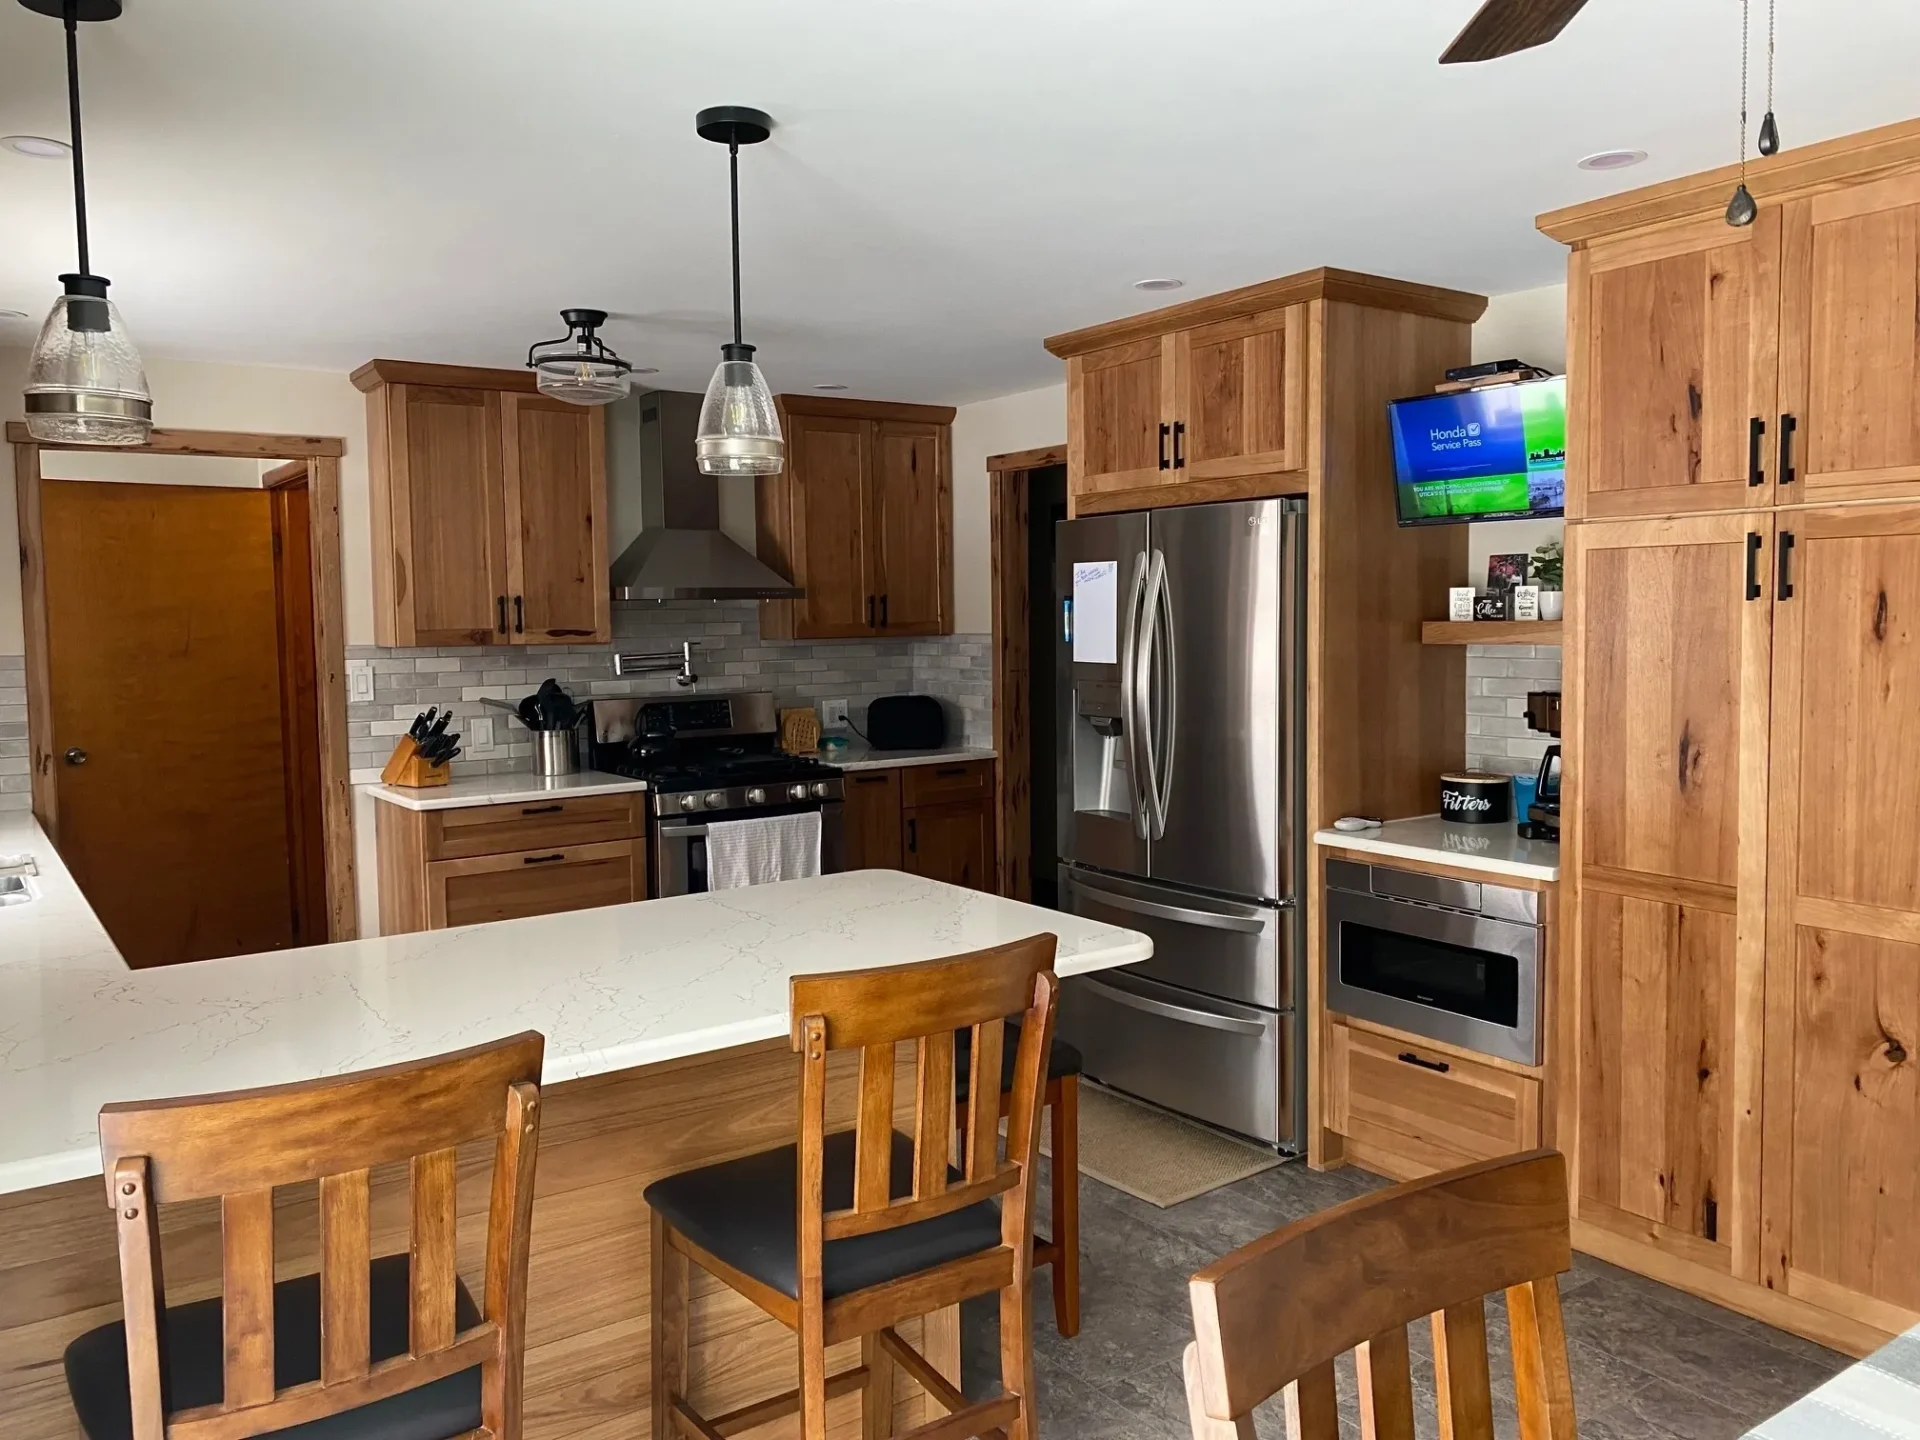 A kitchen with wood cabinets and counter tops.